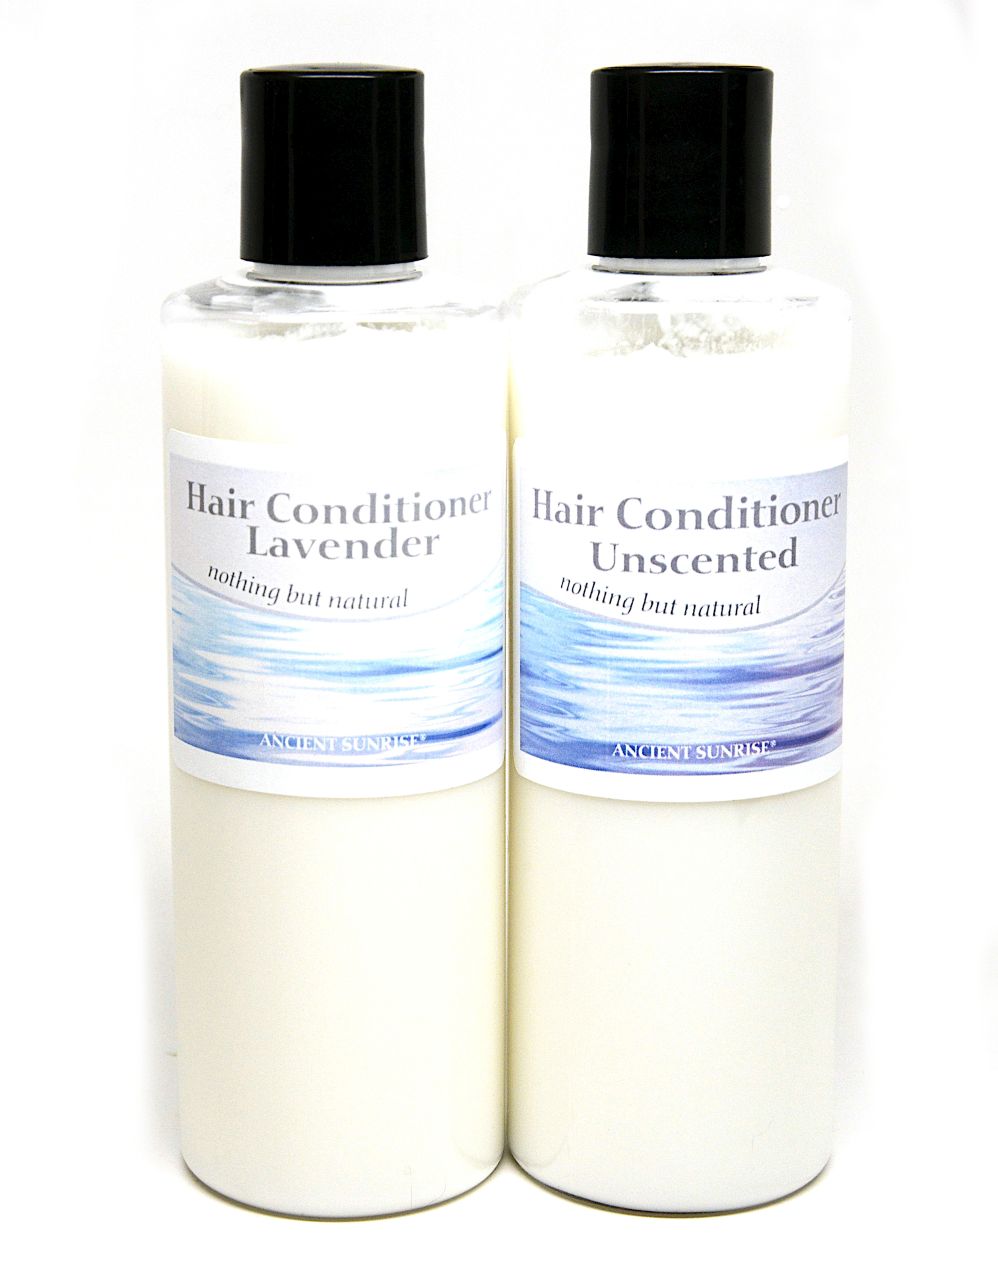 Natural hair conditioner with rice bran and aloe vera oils.